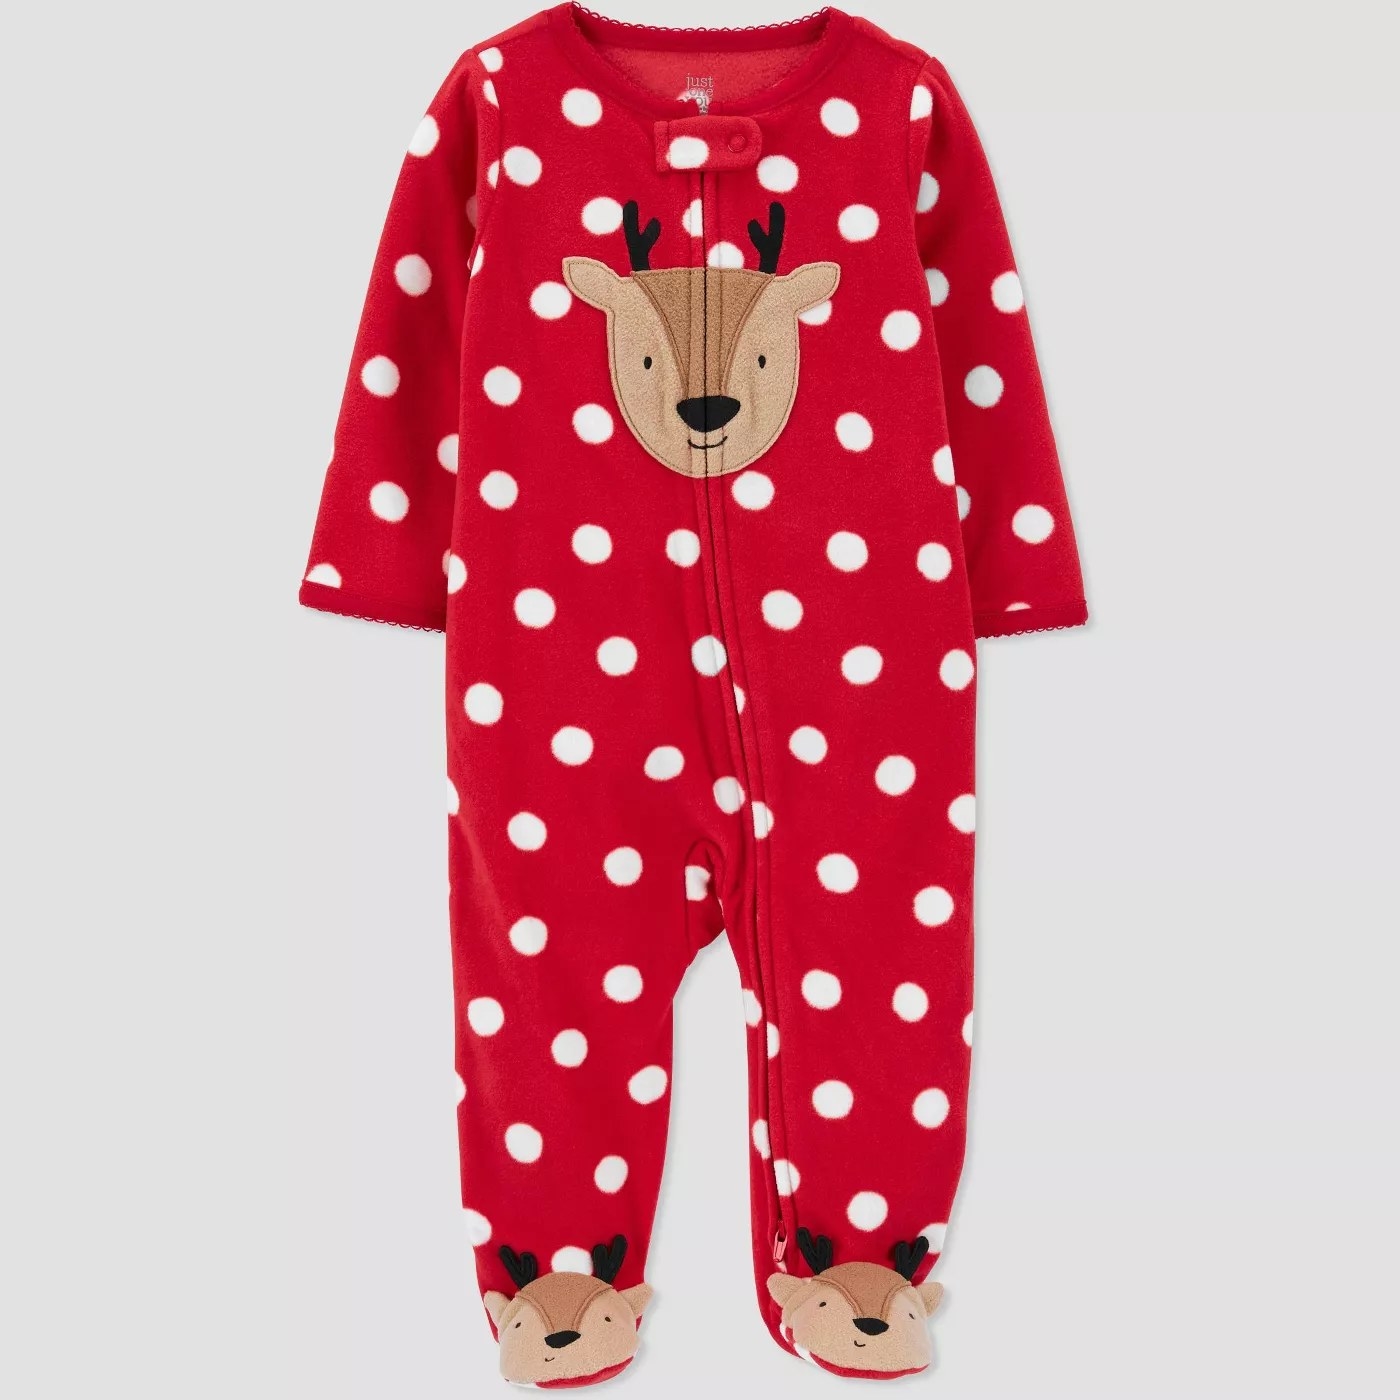 Red pajamas with white spots and reindeers on the chest and feet